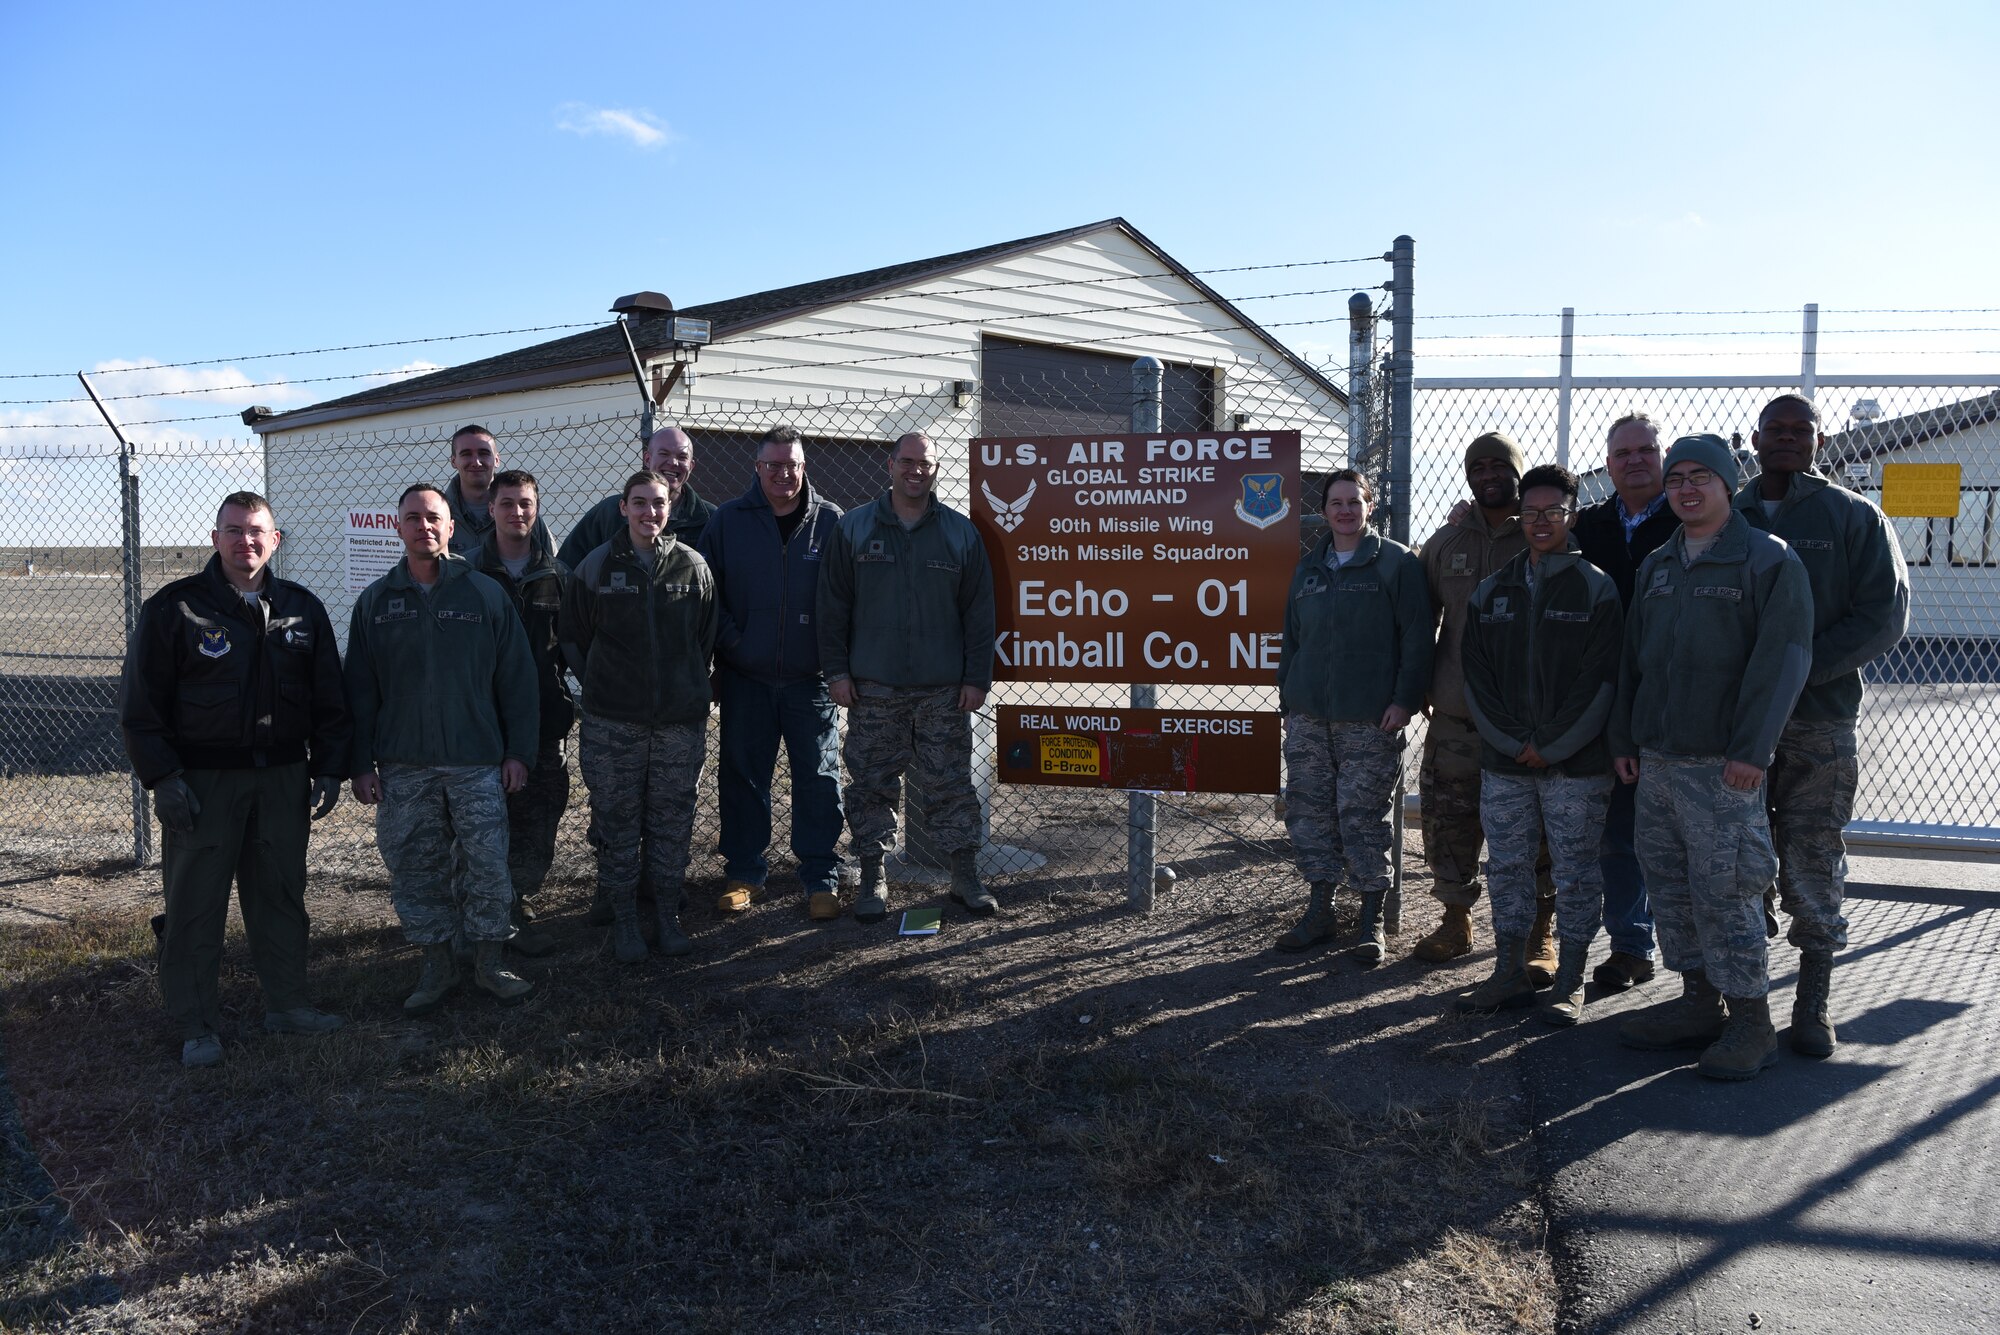 The 319th Missile Squadron hosted a group of 90th Logistic Readiness Squadron Airmen at a Missile Alert Facility, F.E. Warren Missile Complex, Nov. 8, 2018, to provide cross-talk between career fields and increase 90th LRS mission role awareness within the ICBM field. The purpose of the tour was to provide 90th LRS Airmen with a sense of purpose within the ICBM mission. (U.S. Air Force photo by Airman 1st Class Abbigayle Wagner)